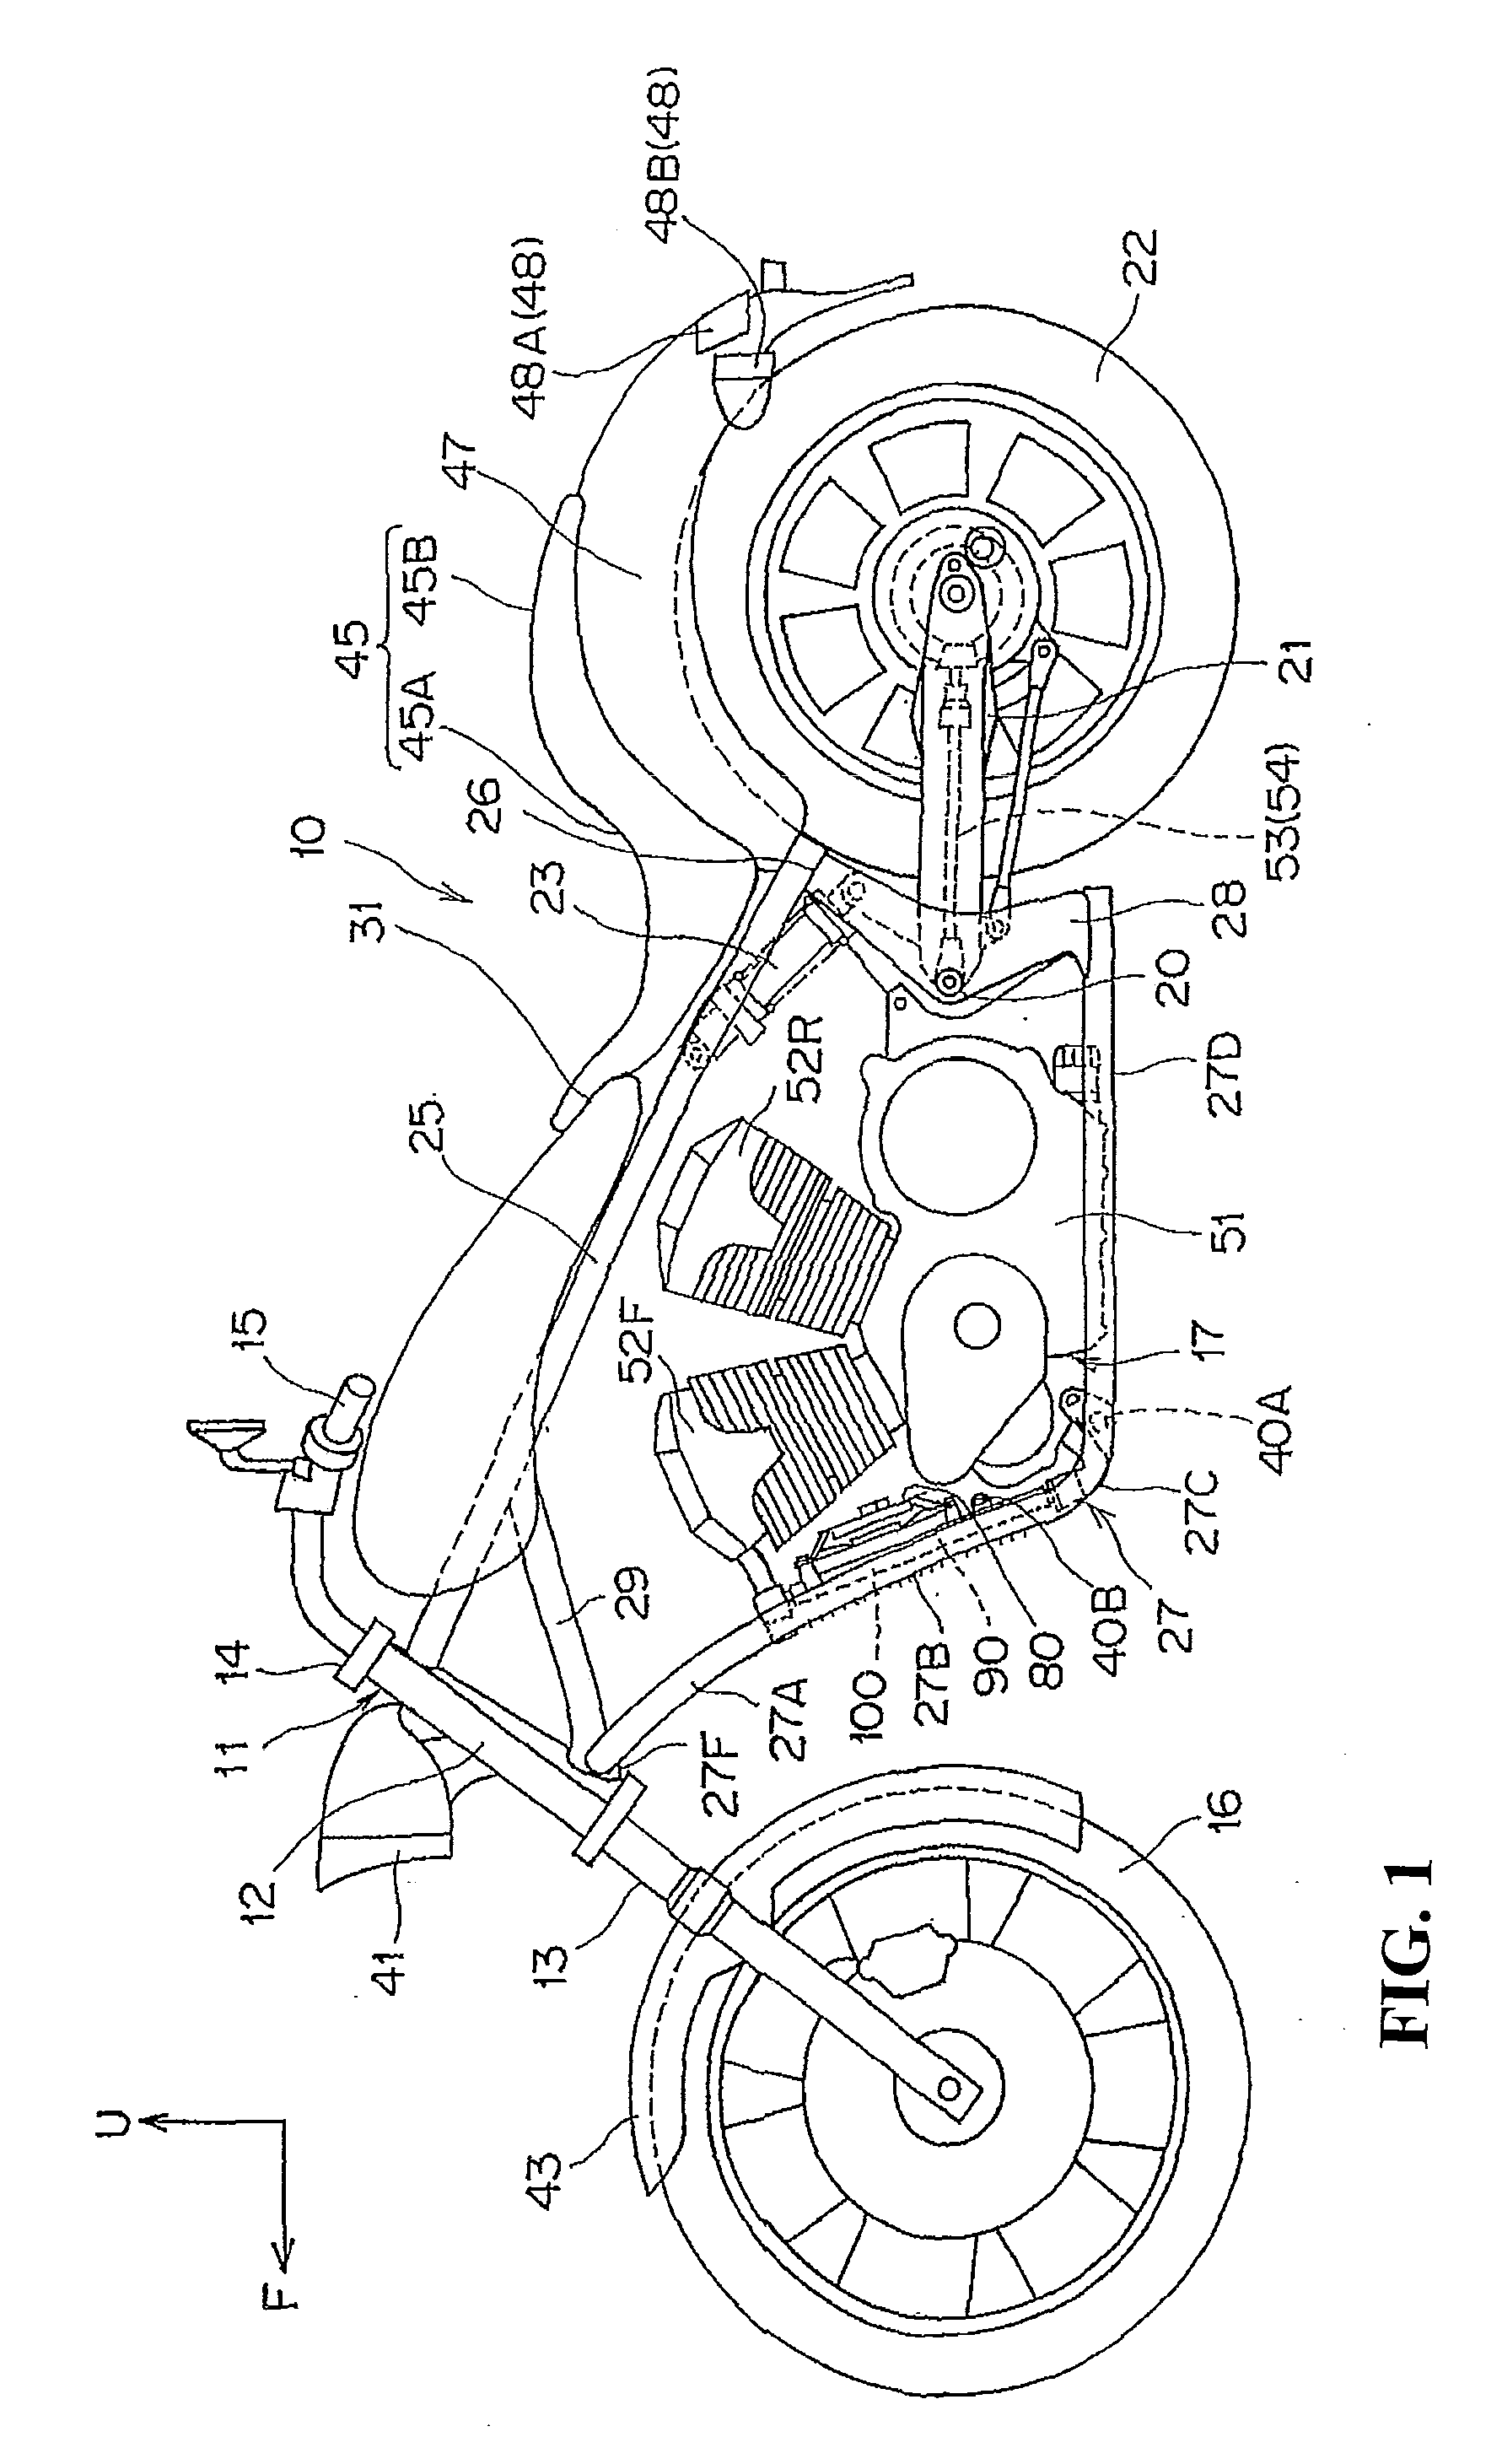 Radiator attachment structure for saddle-ride type vehicle